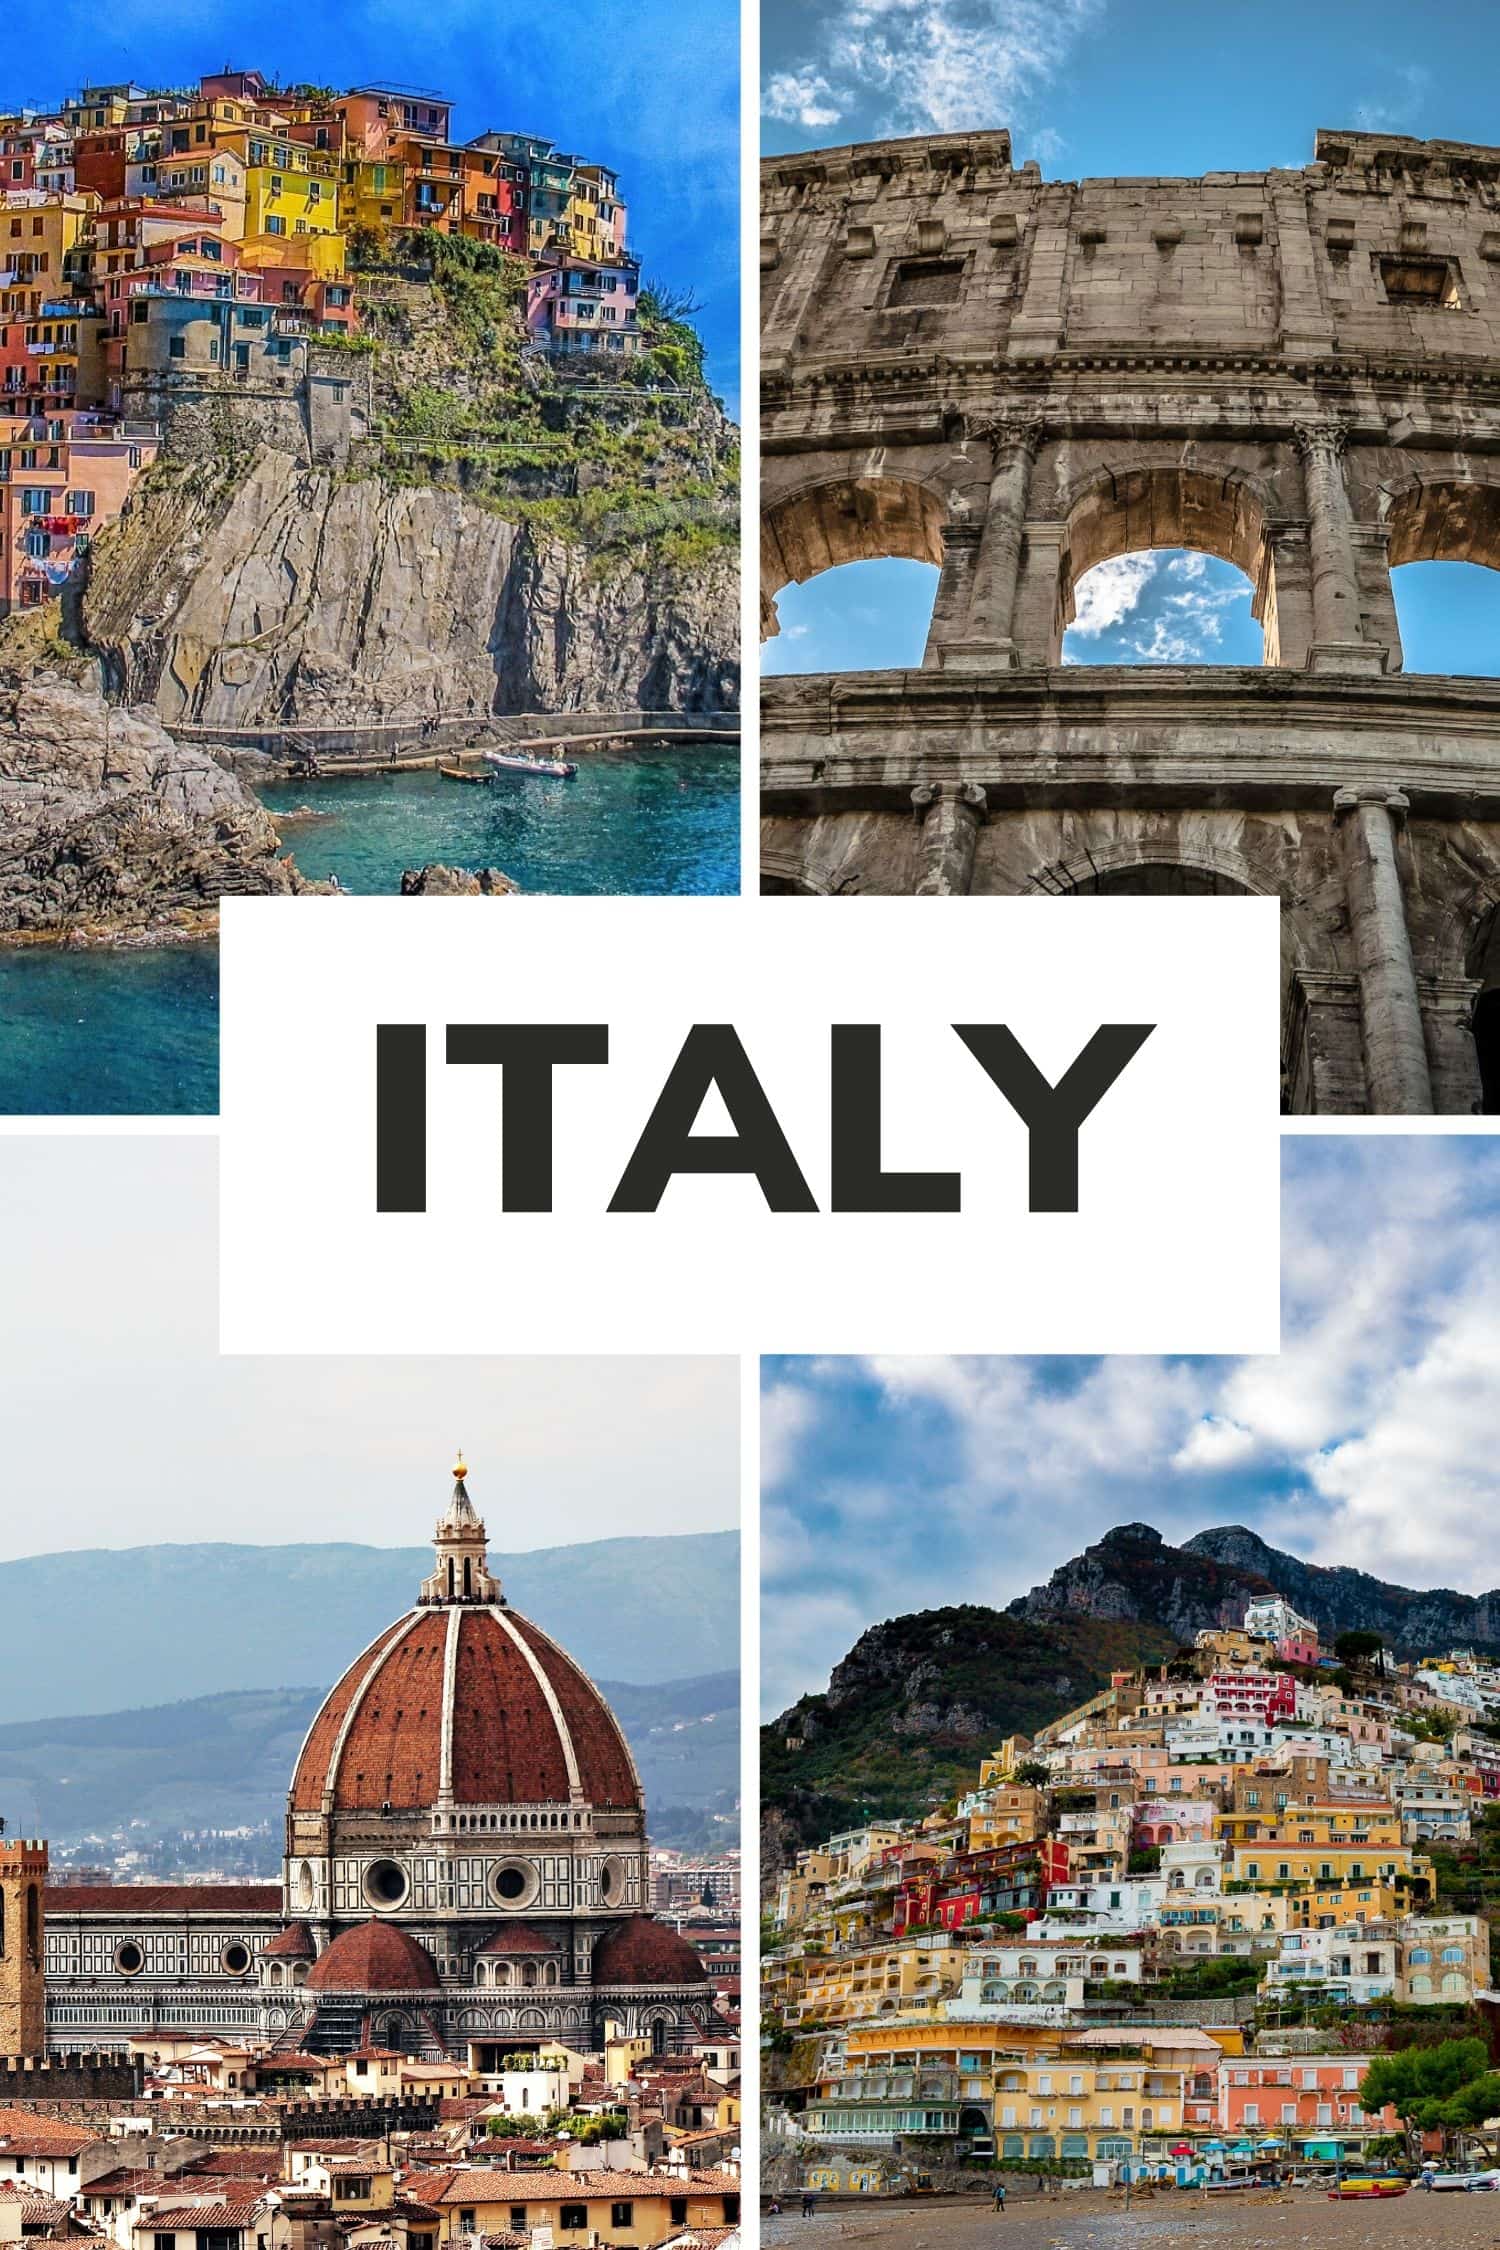 Collage of four pictures from Italy with text overlay that says "Italy"